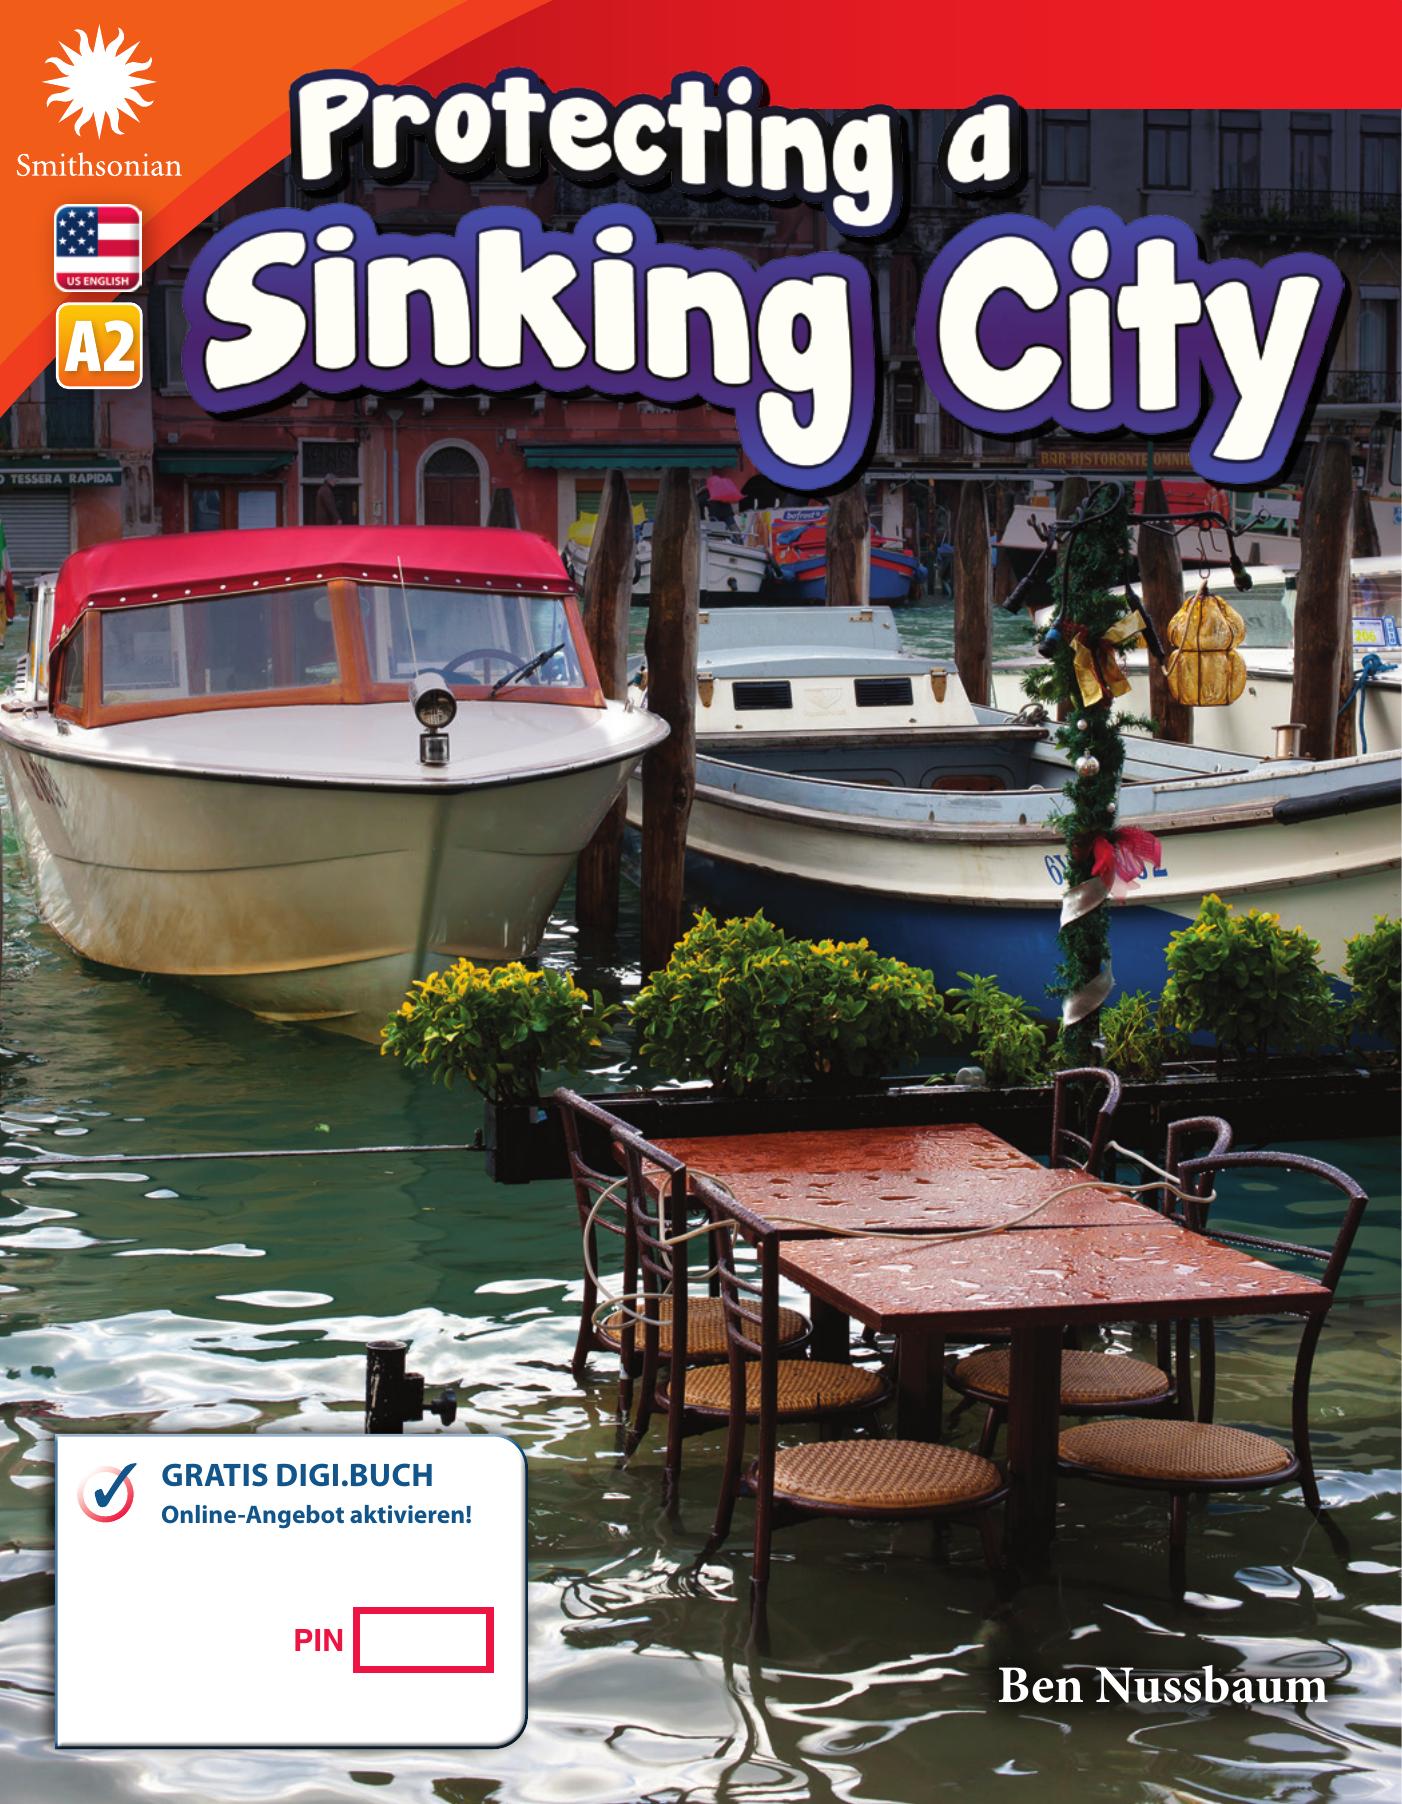 A2 – Protecting a Sinking City